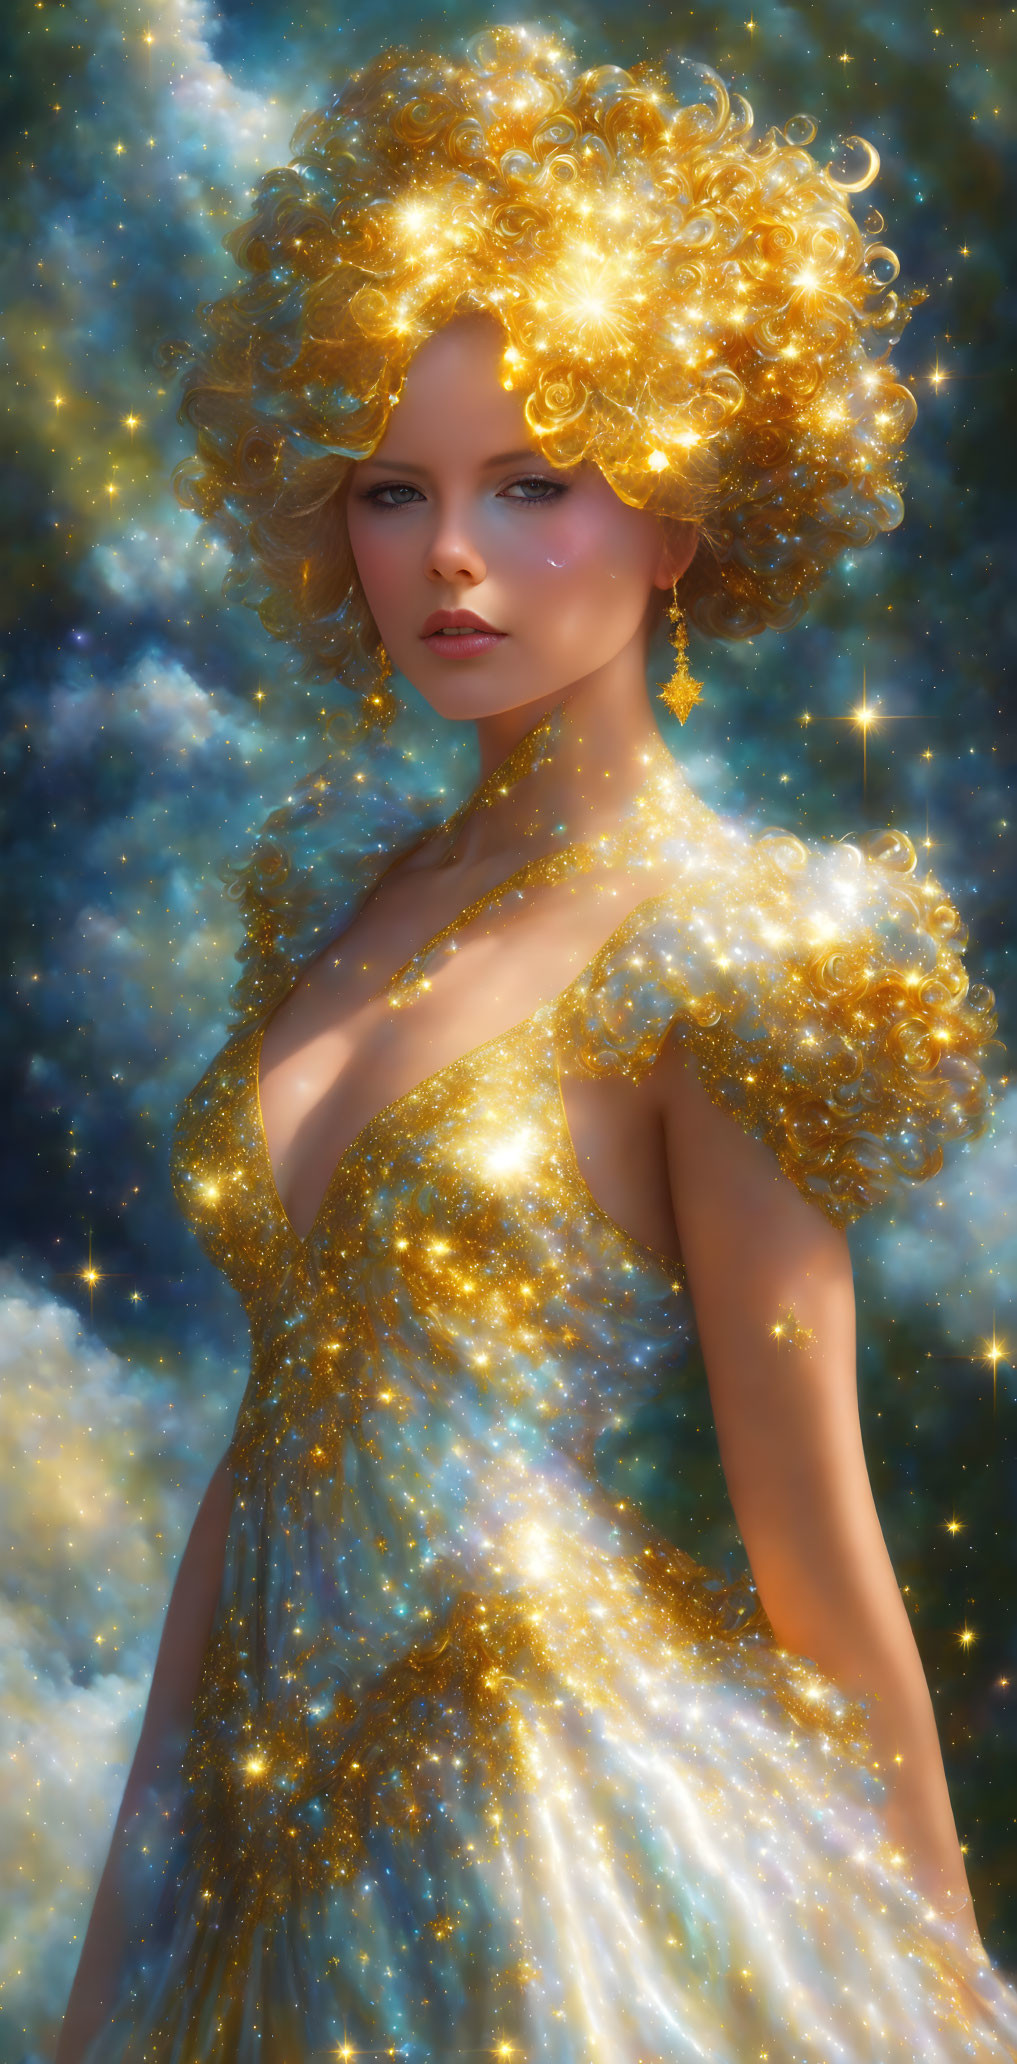 Golden-haired woman in sparkly dress against starry backdrop